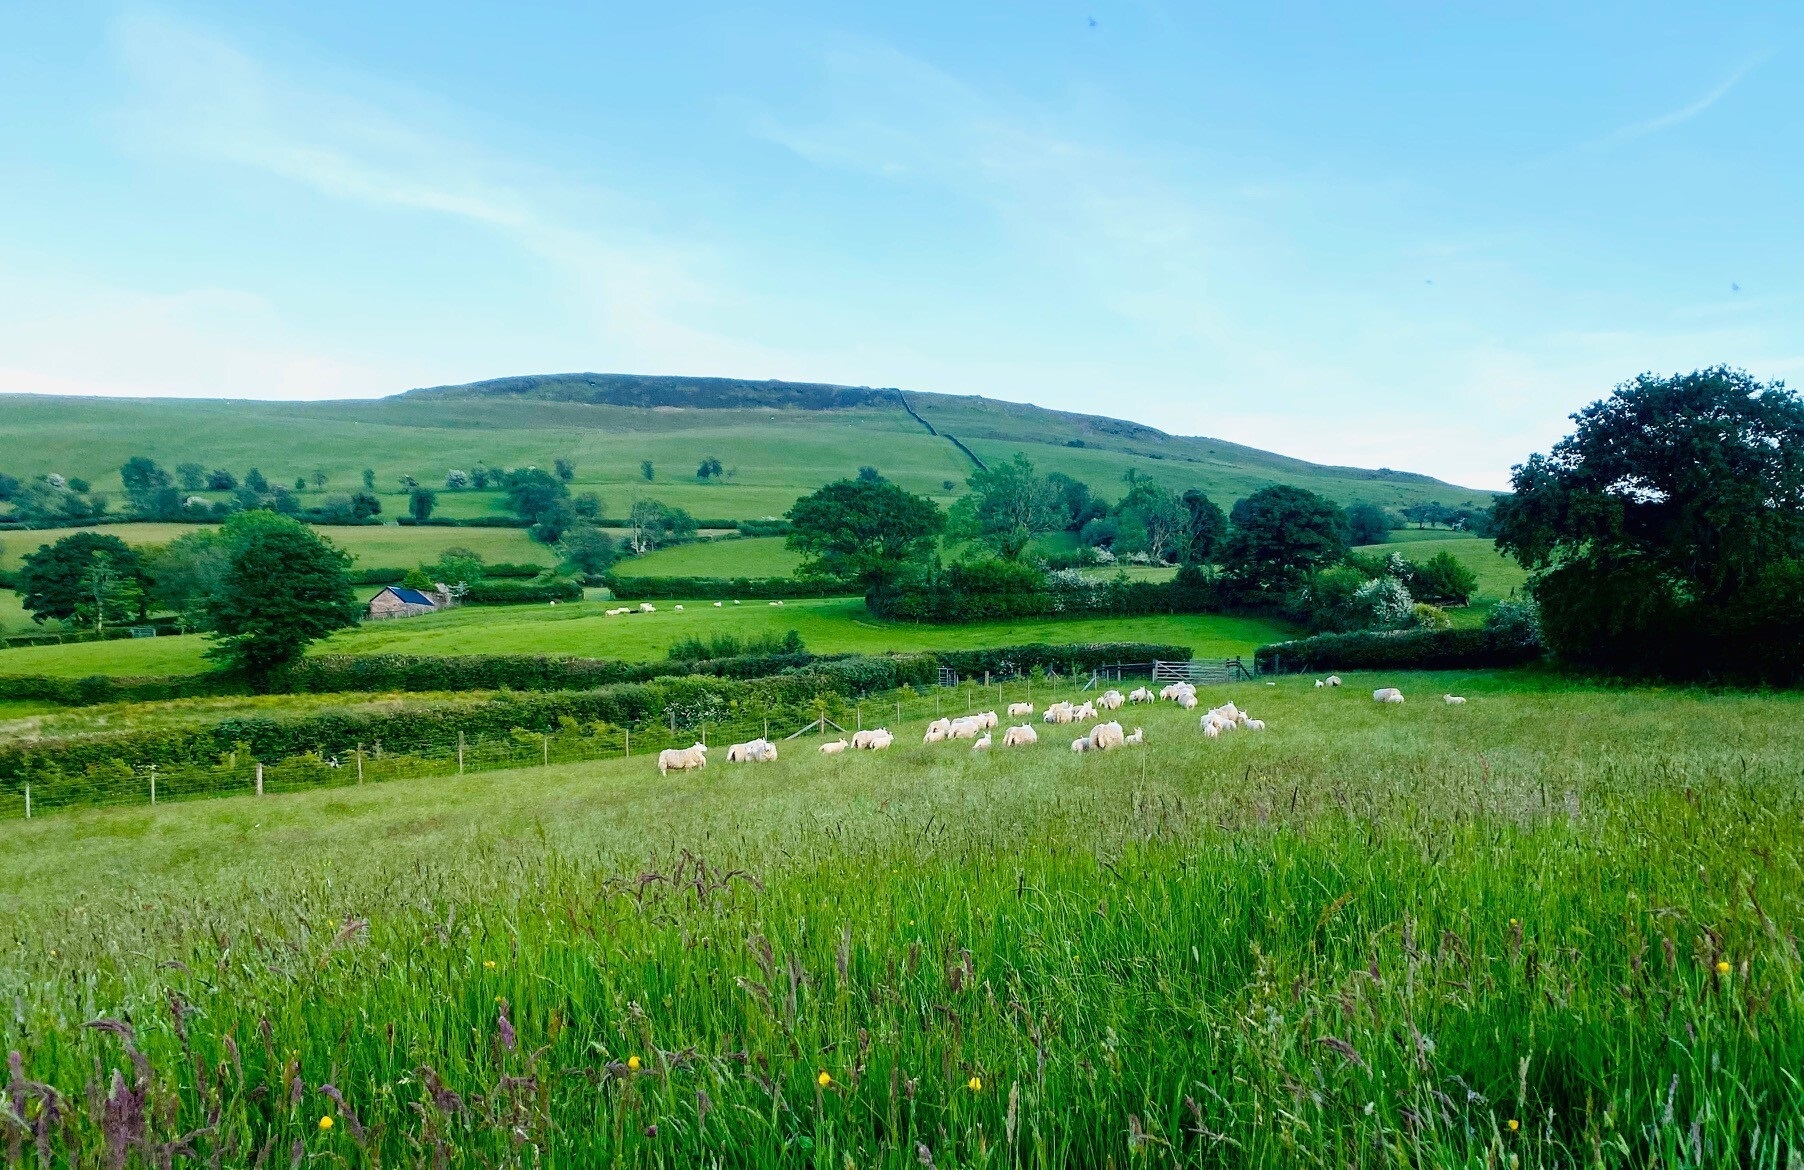 Sheep producers are putting a spotlight on the value of grasslands to the carbon cycle, biodiversity, habitats and soil organic matter